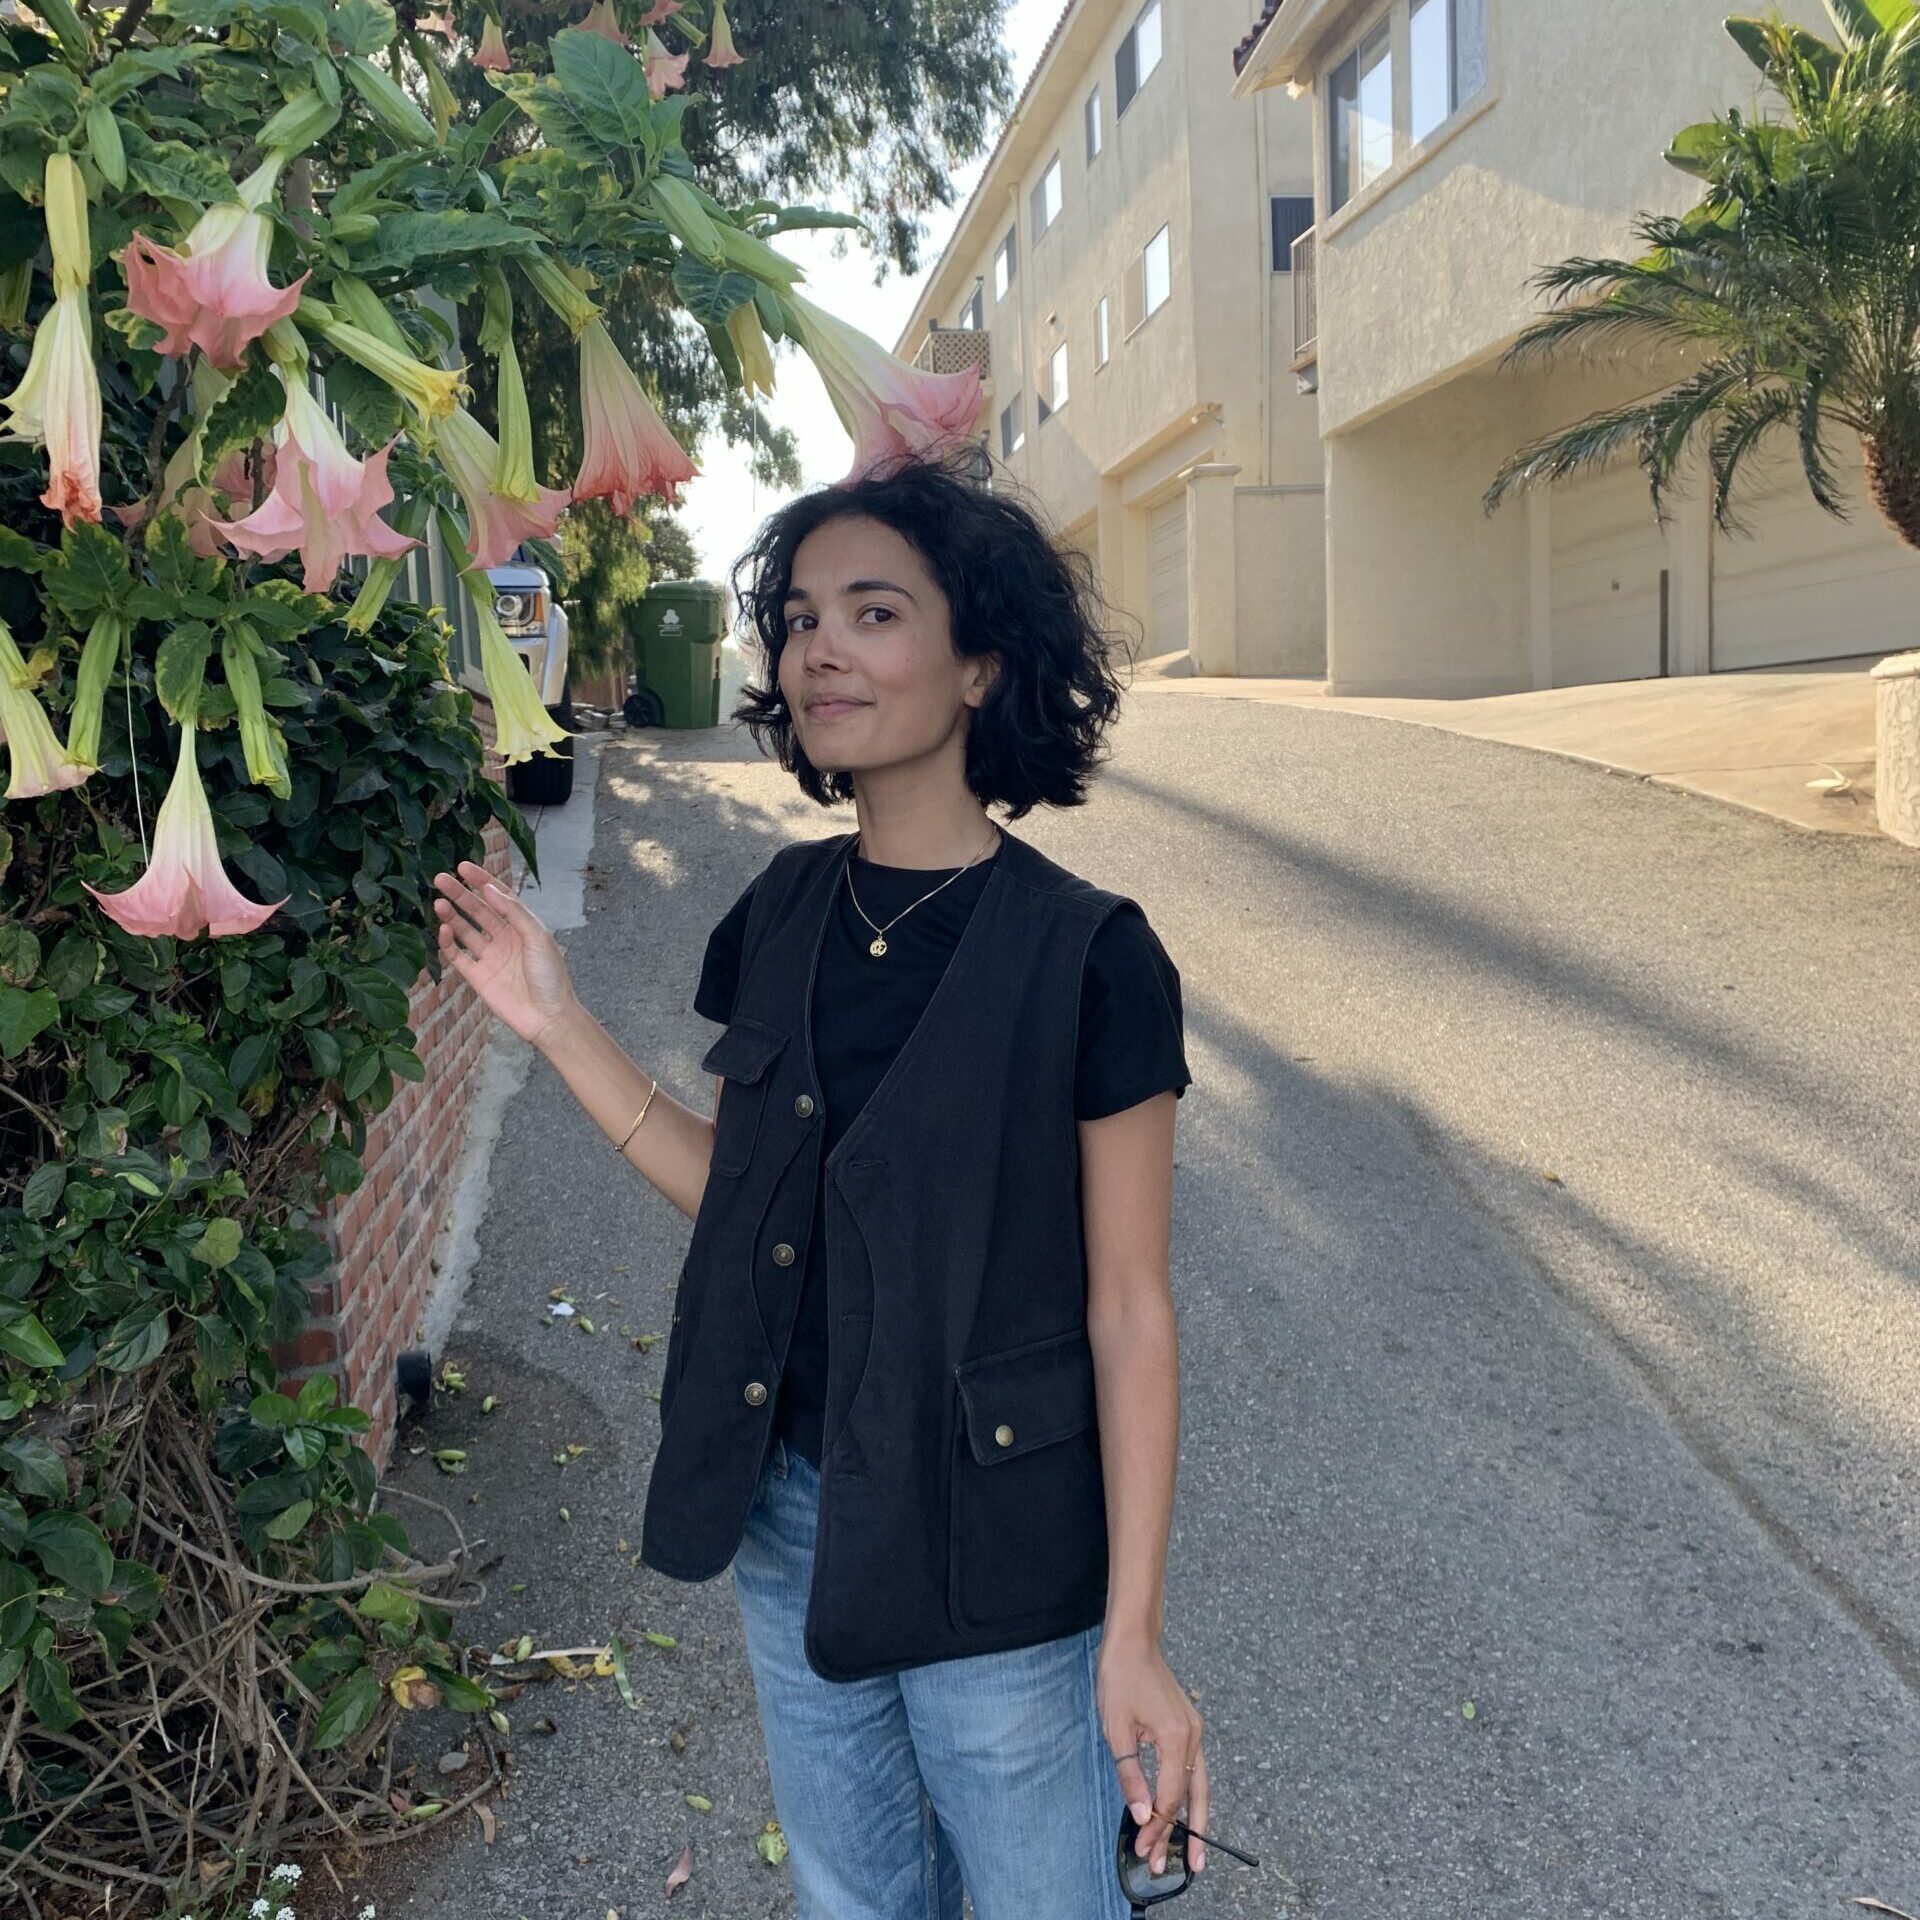 Alisha stands near a flowering tree on a sunlit street in California wearing a black shirt and jeans holding sunglasses in her hands